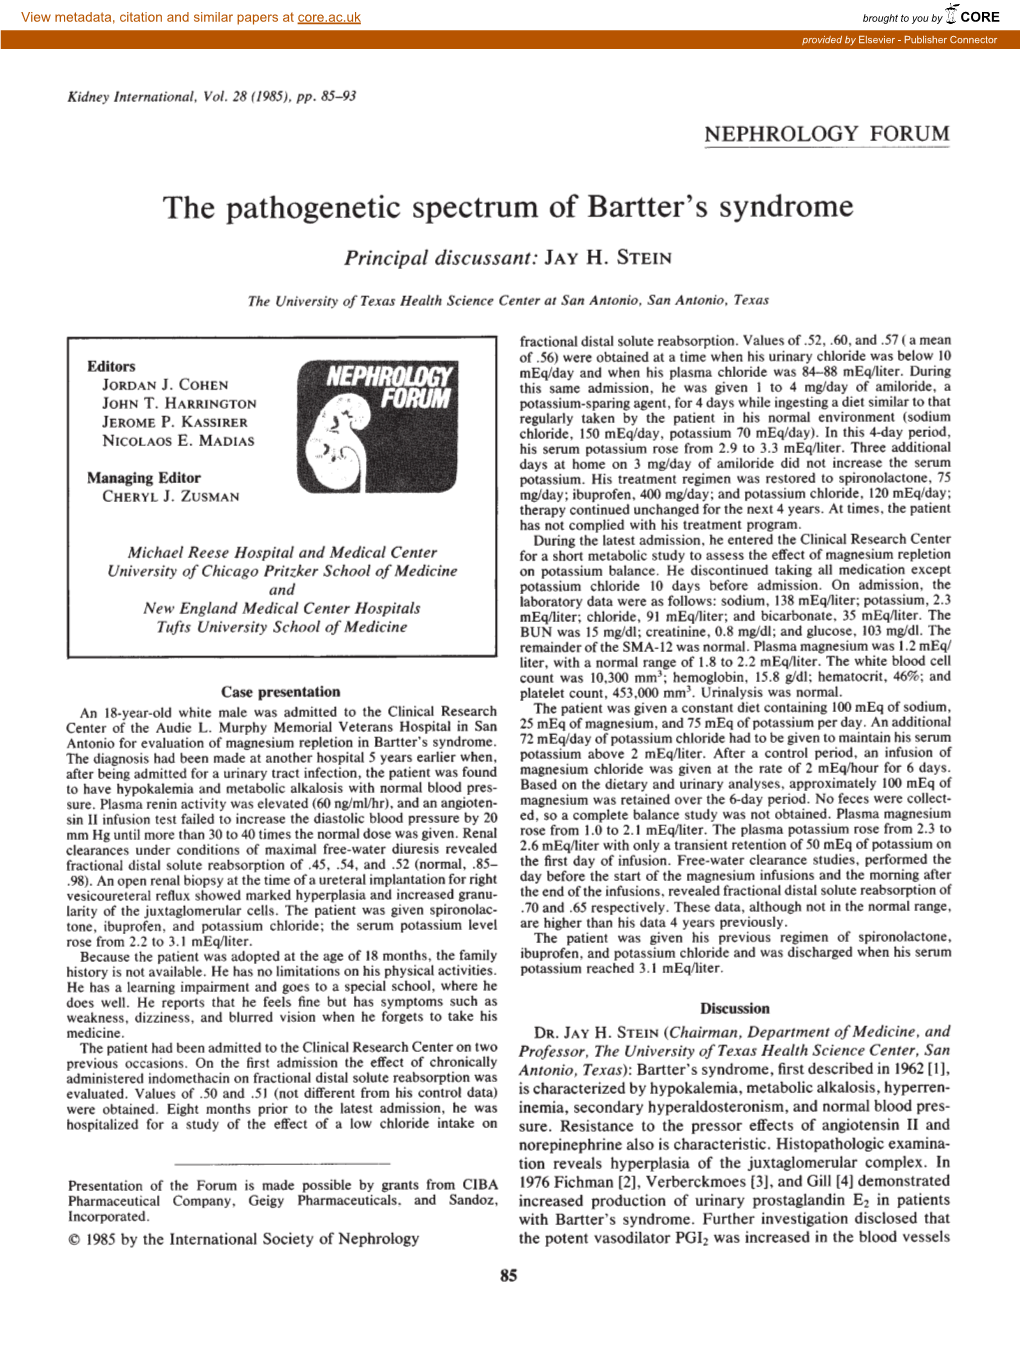 The Pathogenetic Spectrum of Bartter's Syndrome Principal Discussant: JAY H